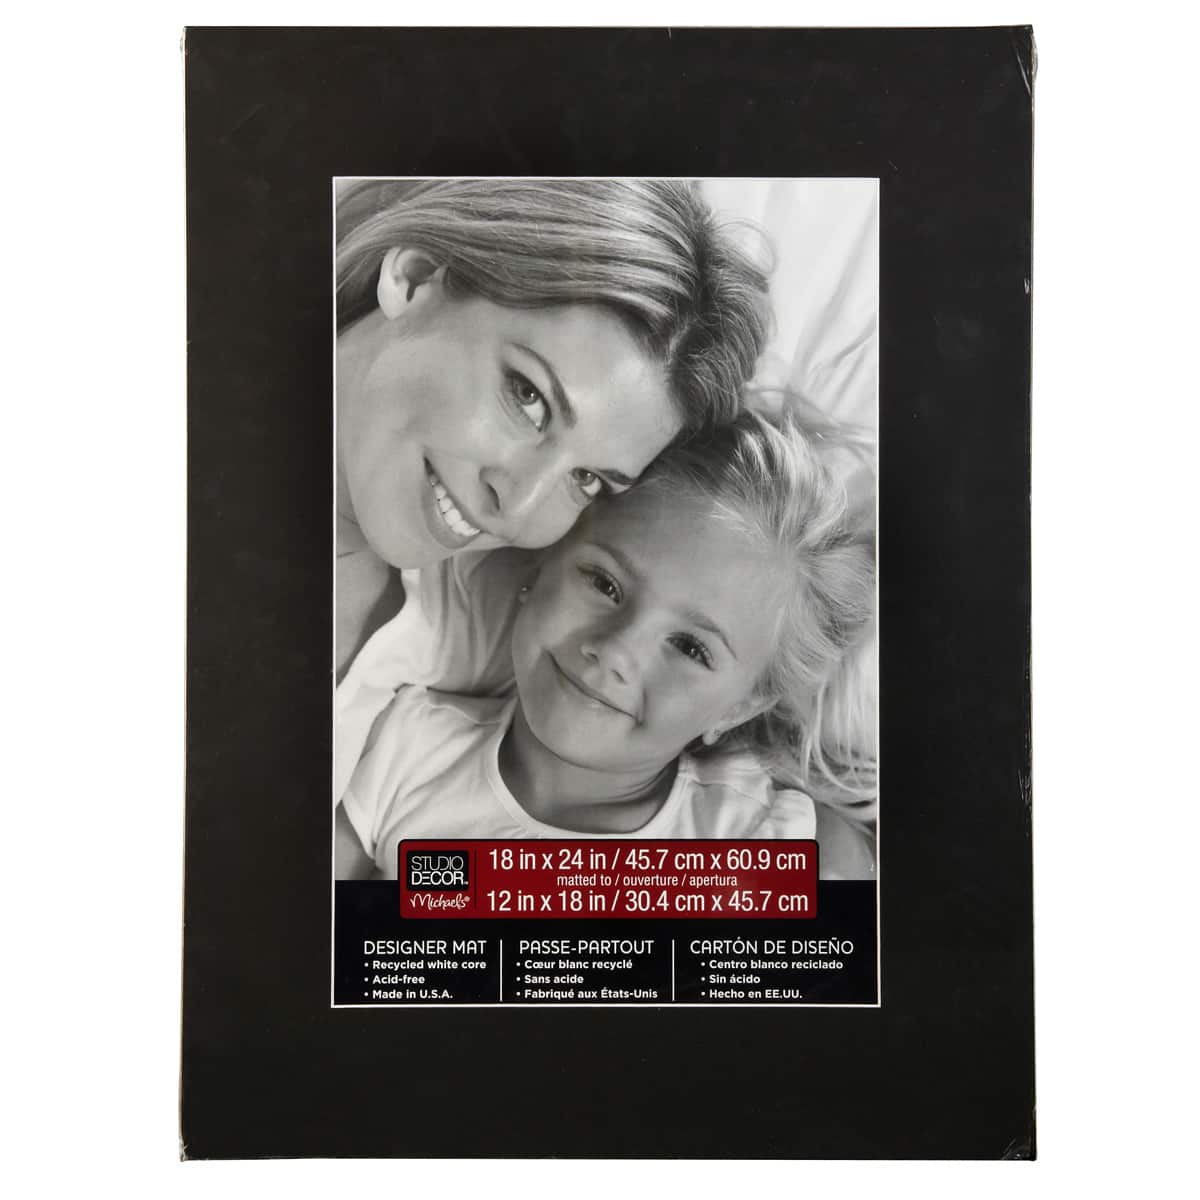 12x18 matted frame michaels